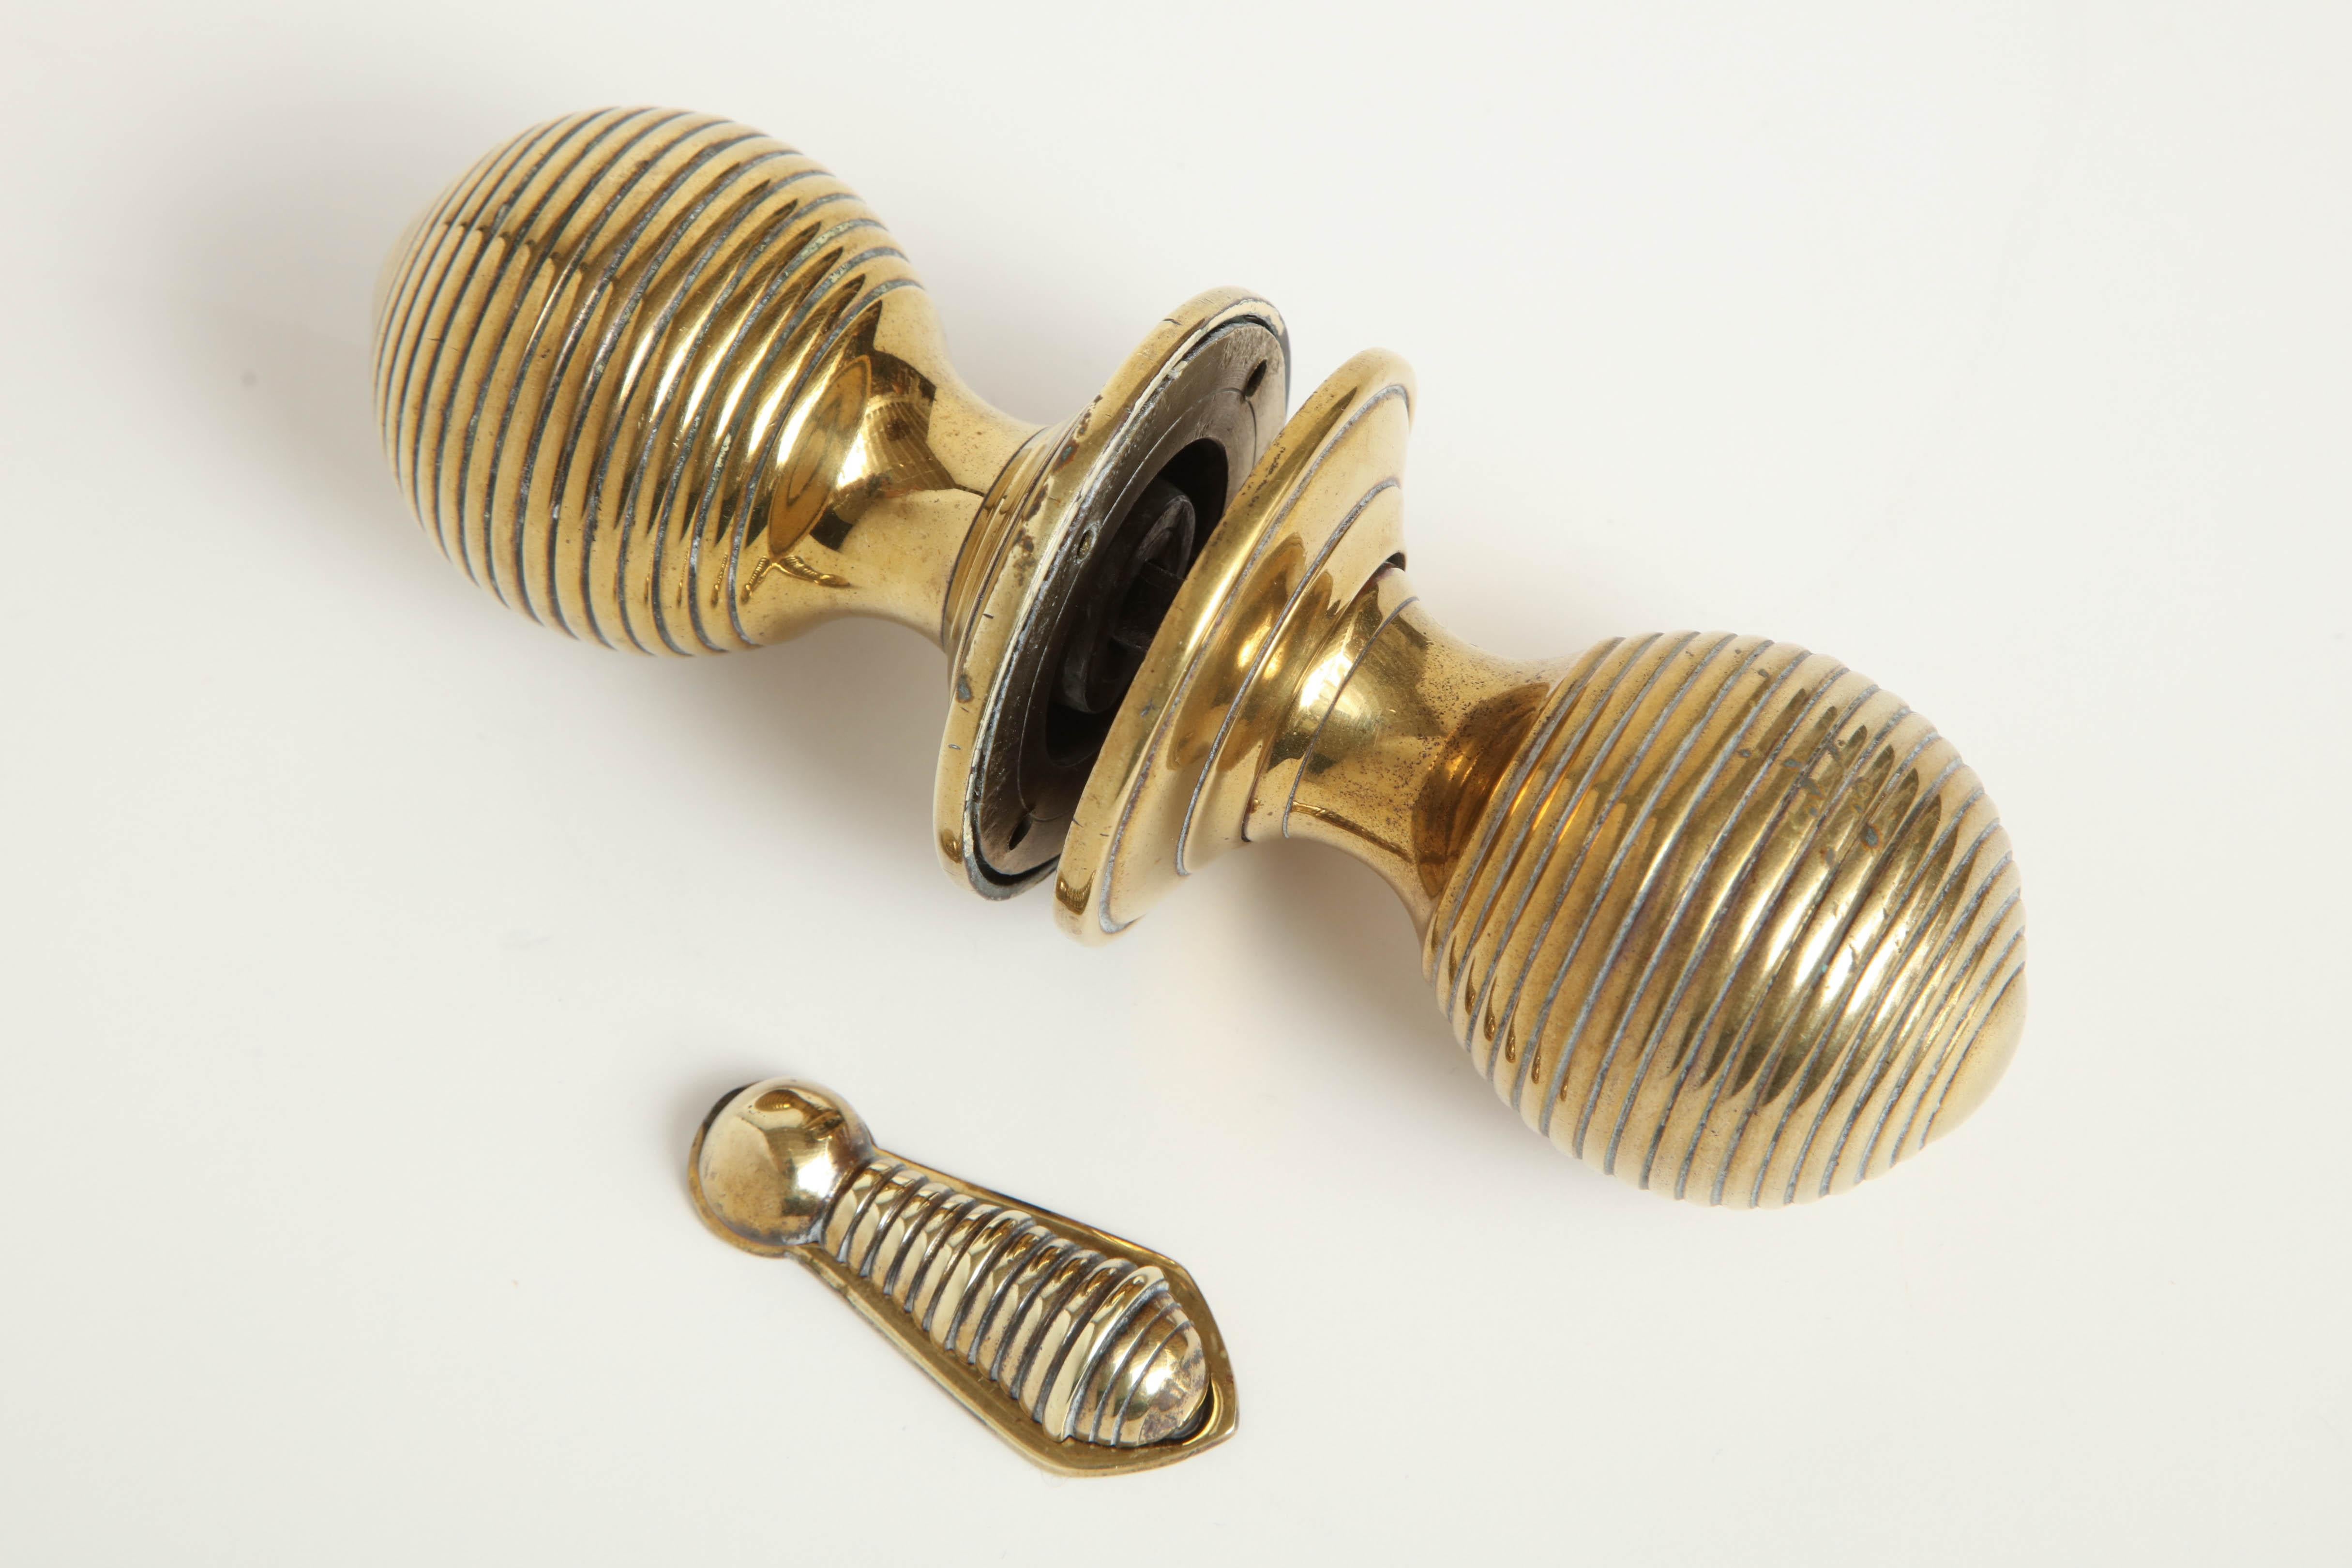 Pair of early 19th century English Regency door Knobs with Escutcheon and cover.